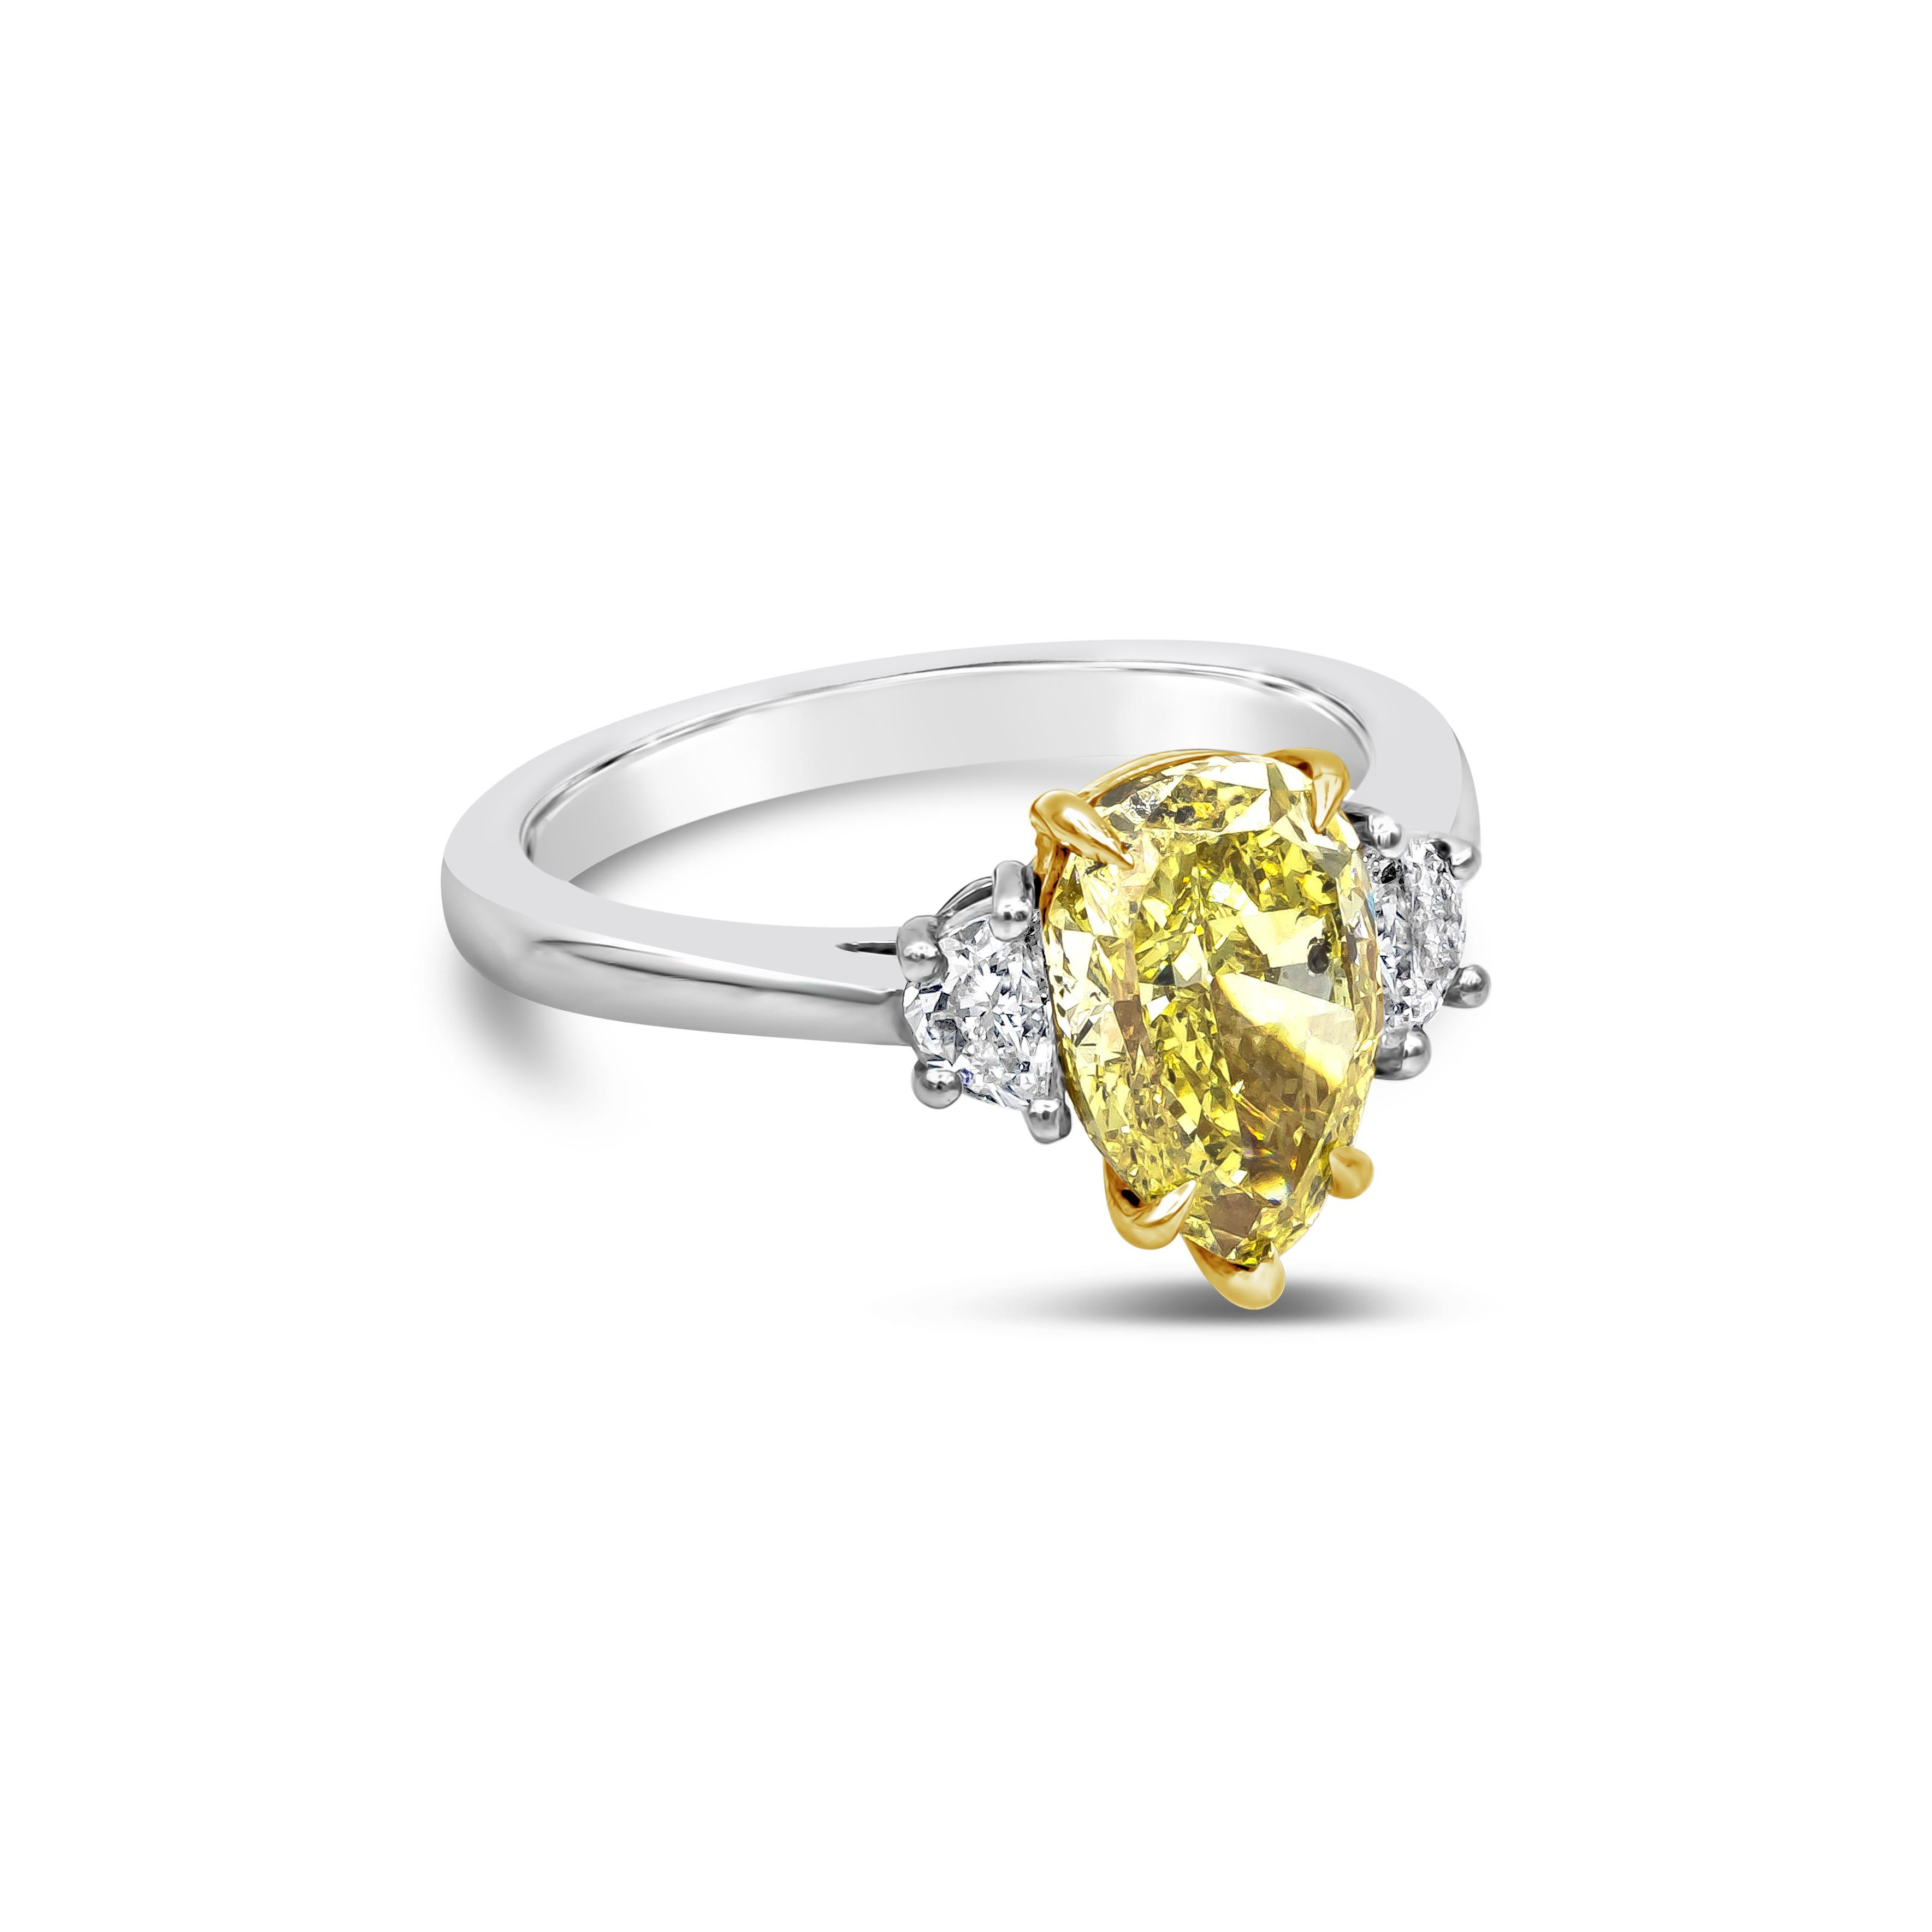 This elegant and stunning three stone engagement ring showcasing a 2.18 carats pear shape diamond center stone certified by GIA as fancy intense yellow color, set in a yellow gold five prong basket setting. Flanking the center are two half moon